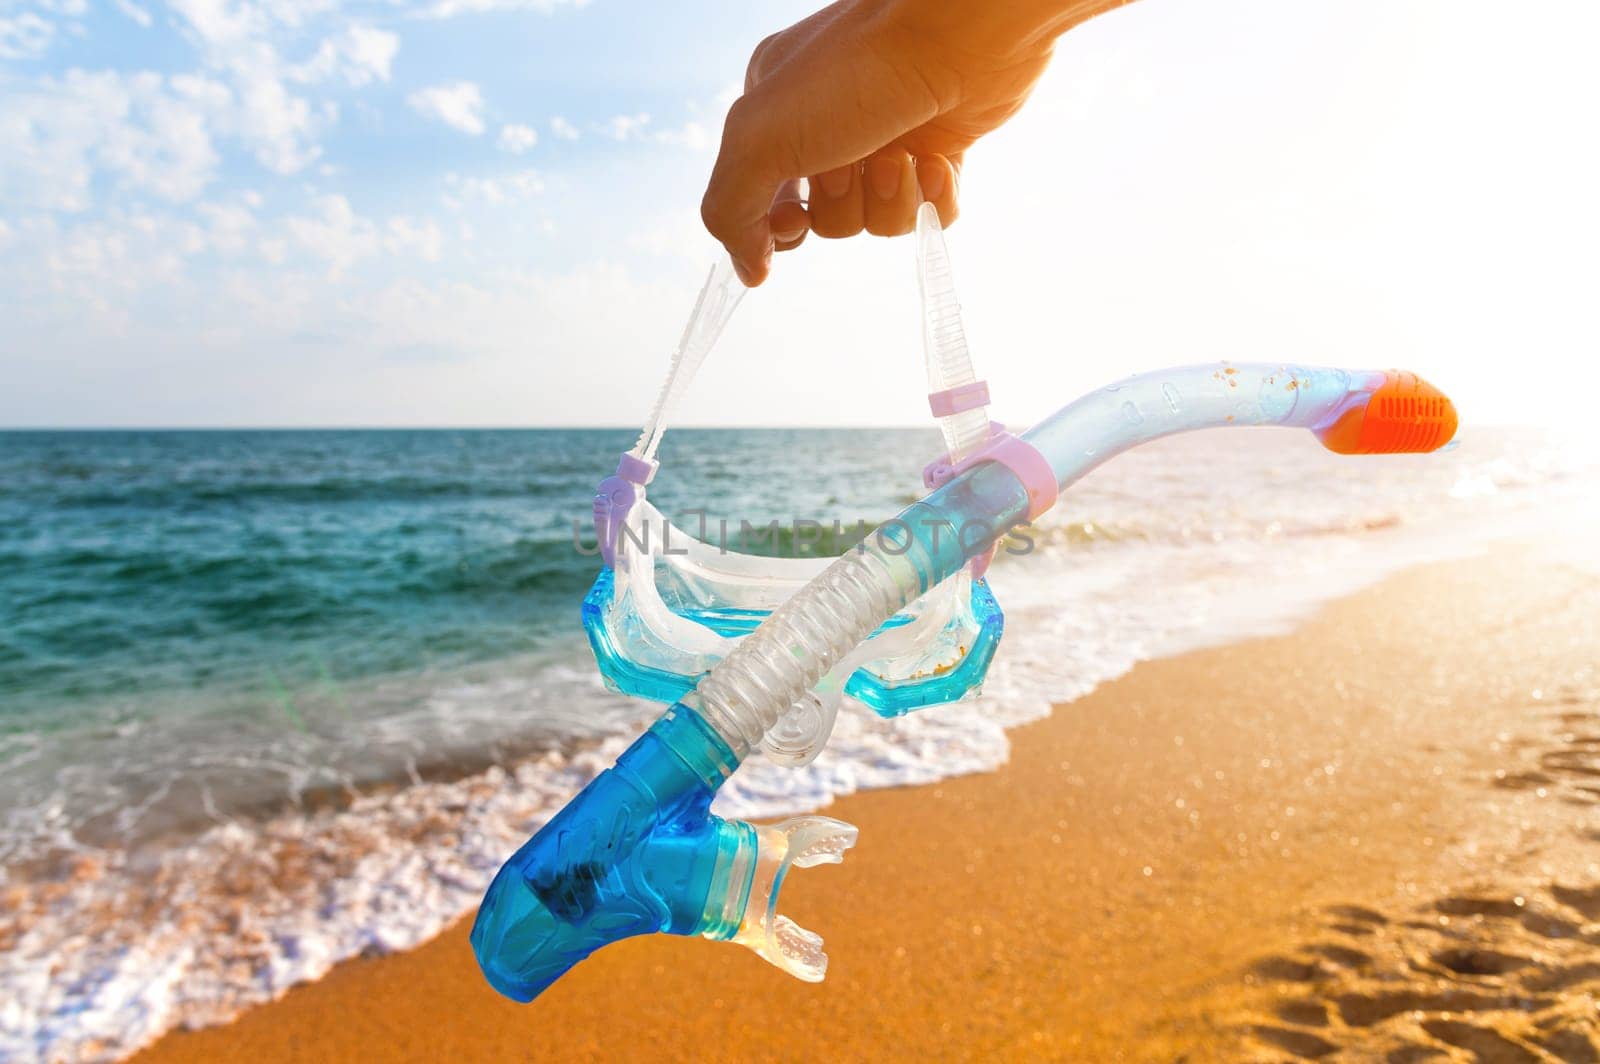 A hand holds a snorkeling mask and snorkel over the ocean water. Summer holiday, bright sun on the beach